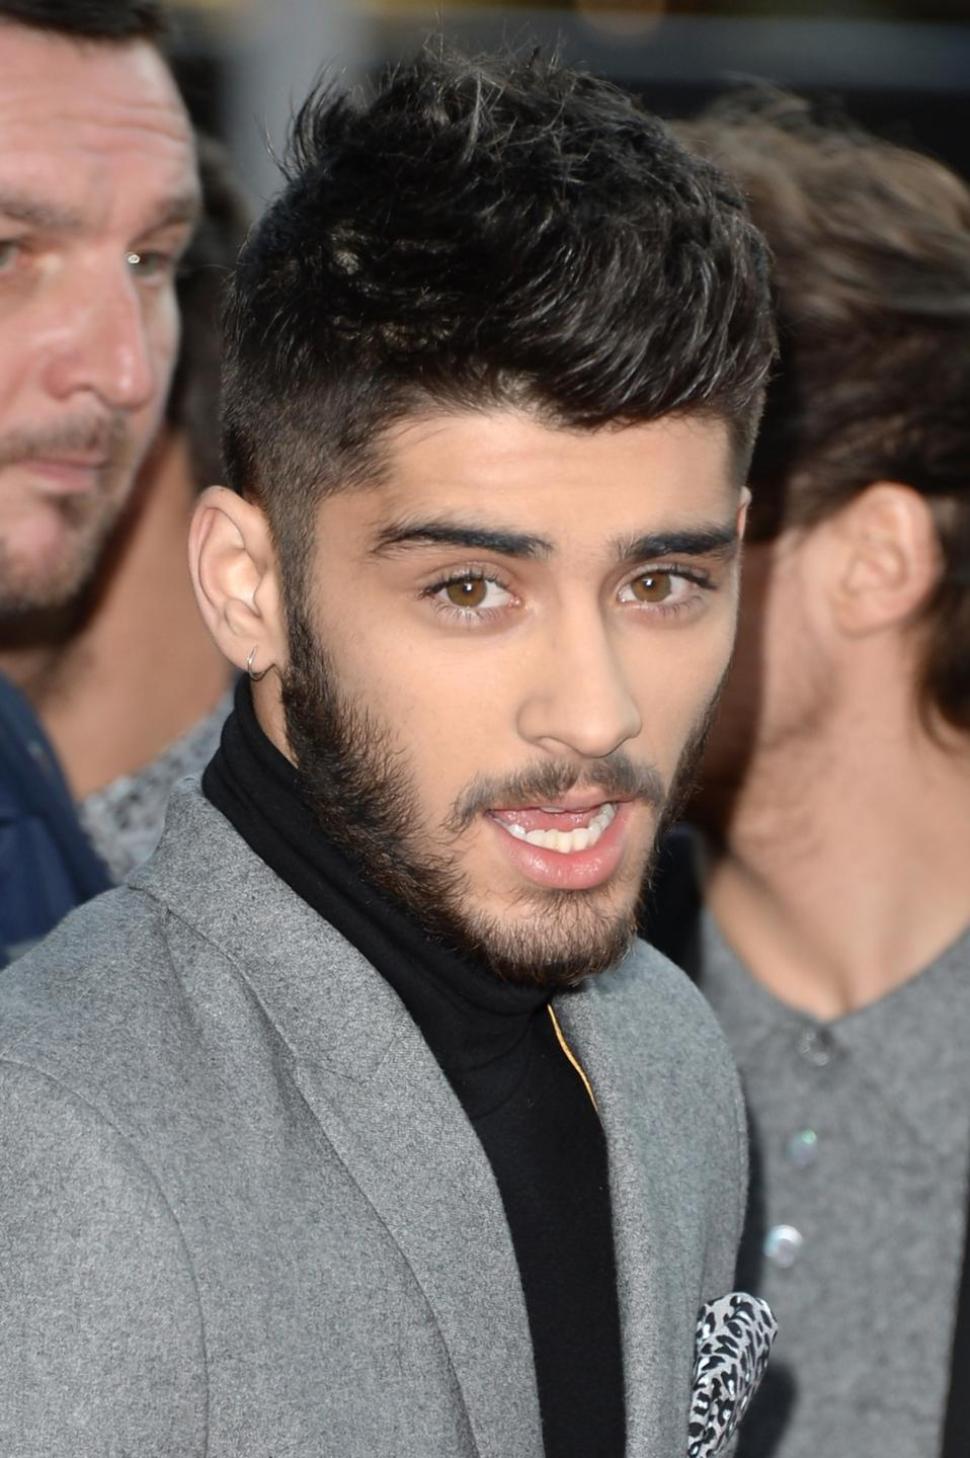 One Direction members said Zayn Malik, above, missed a show due to a stomachache.